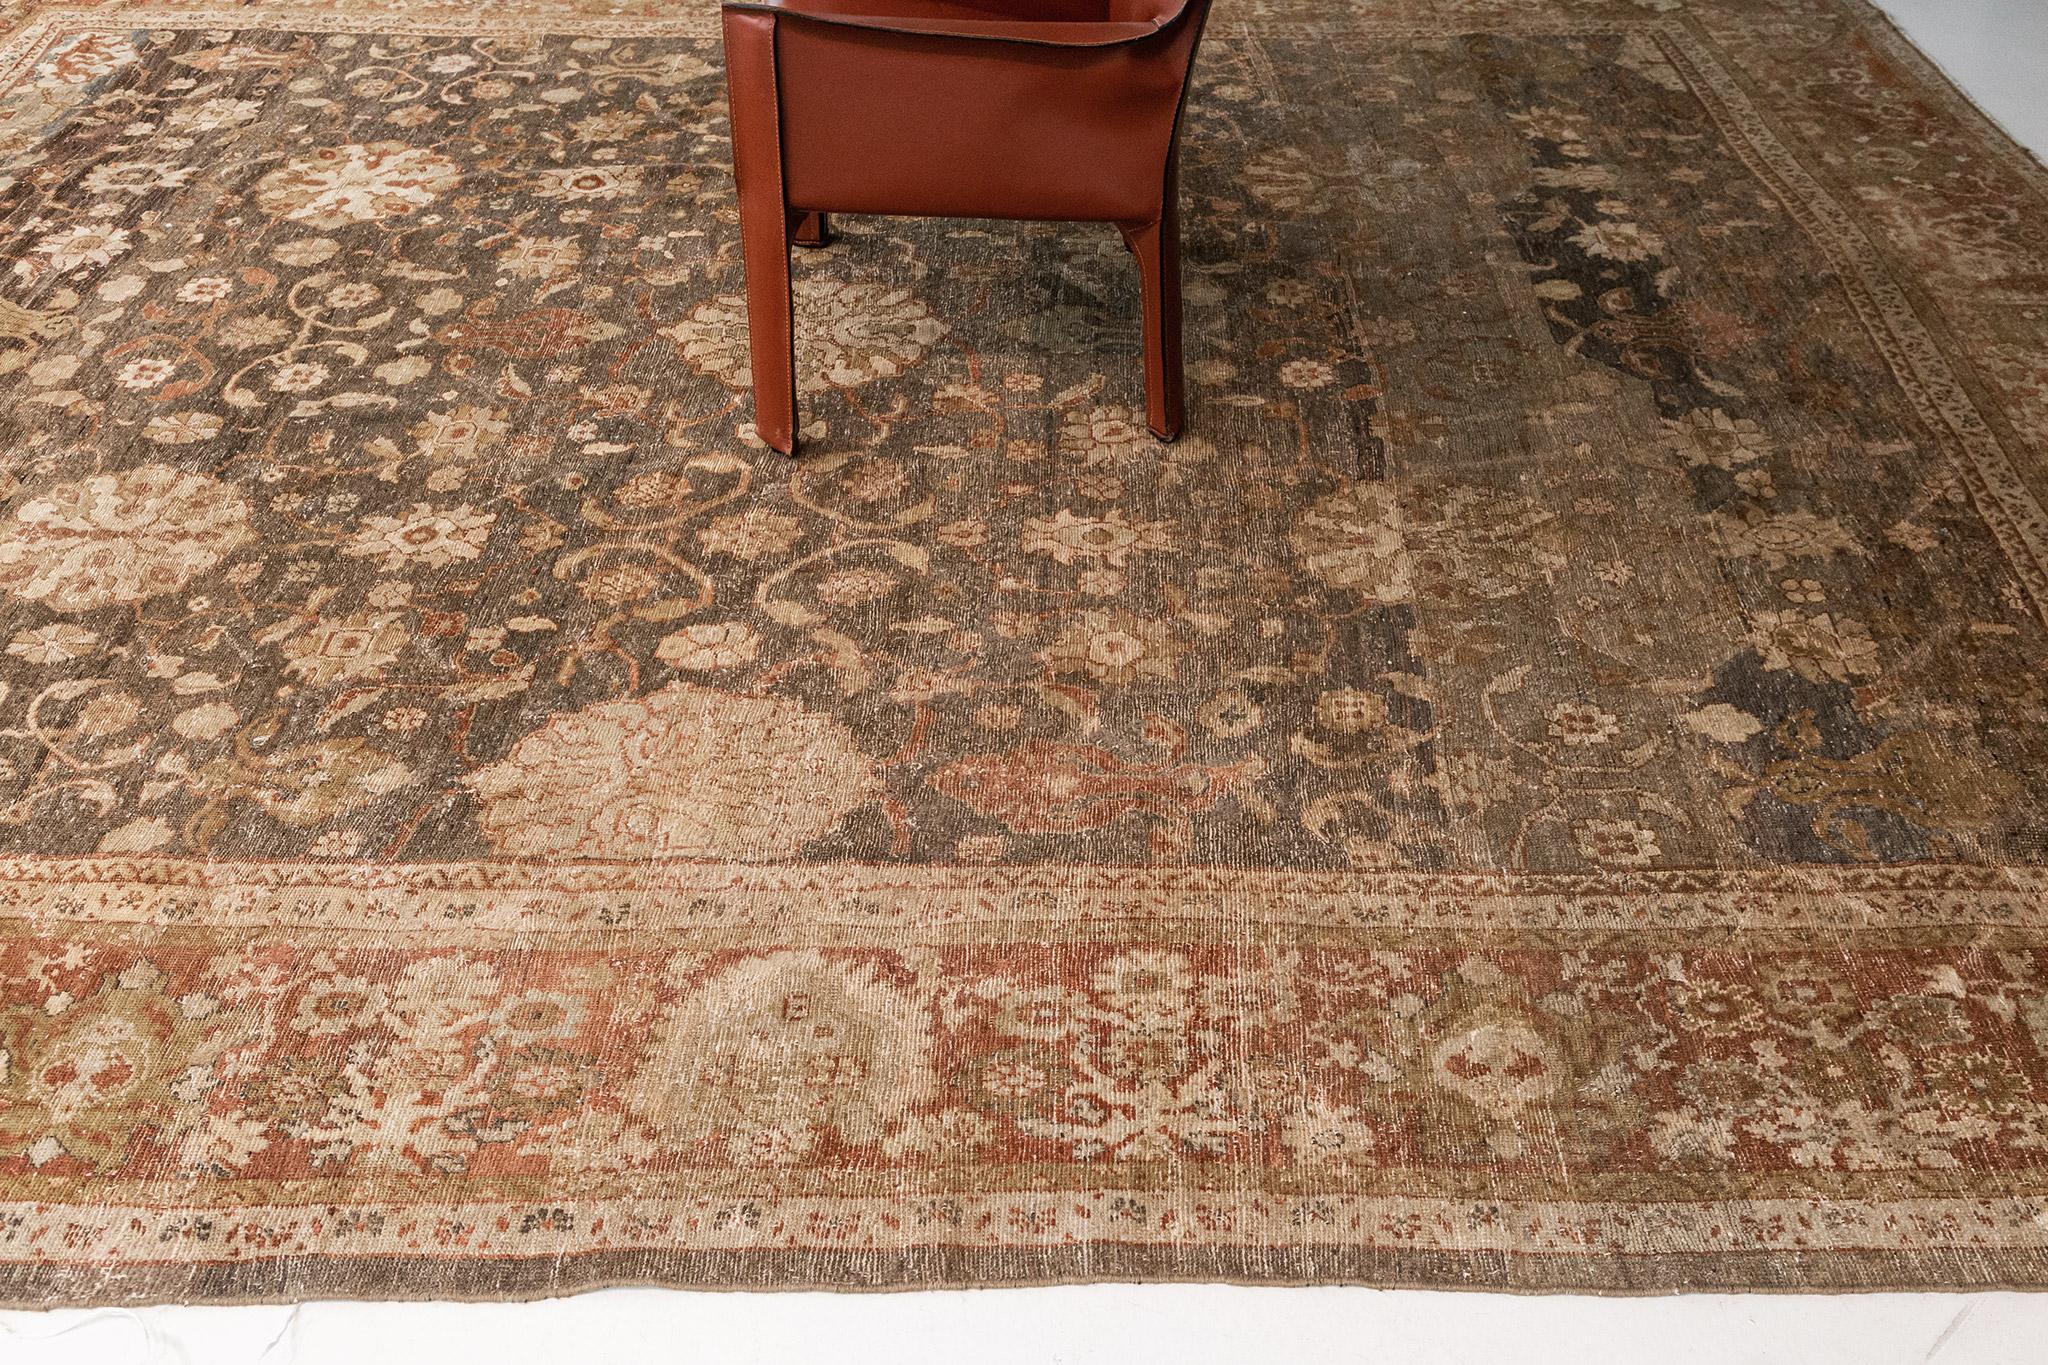 Displaying warm earth-tone colours with its relaxing intricacy, this Antique Persian Ziegler rug beautifully embodies a modern rustic style. The weathered abrashed mocha field is covered with an all-over Herati pattern and an array of blooming